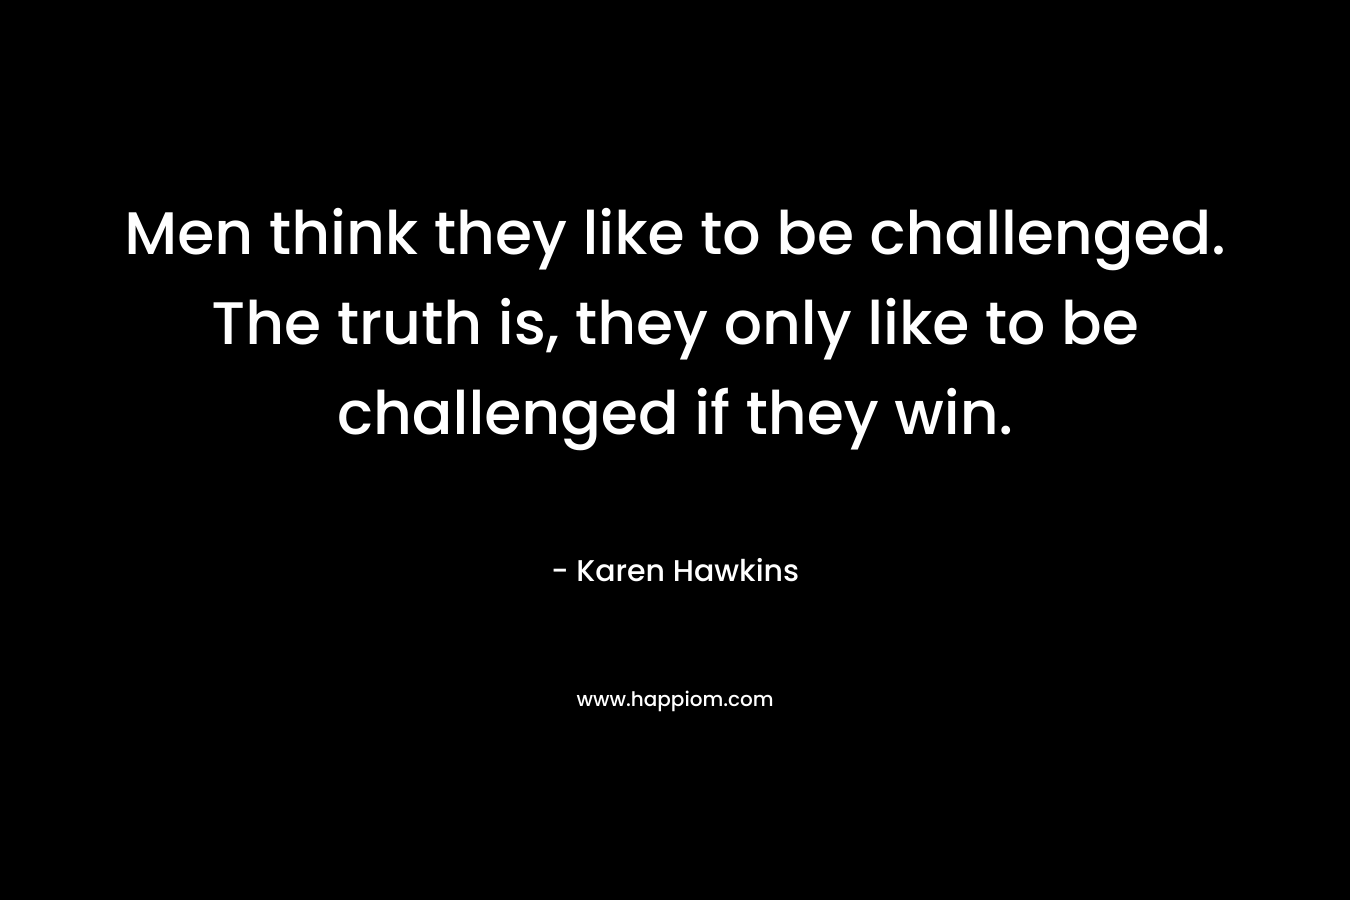 Men think they like to be challenged. The truth is, they only like to be challenged if they win. – Karen Hawkins